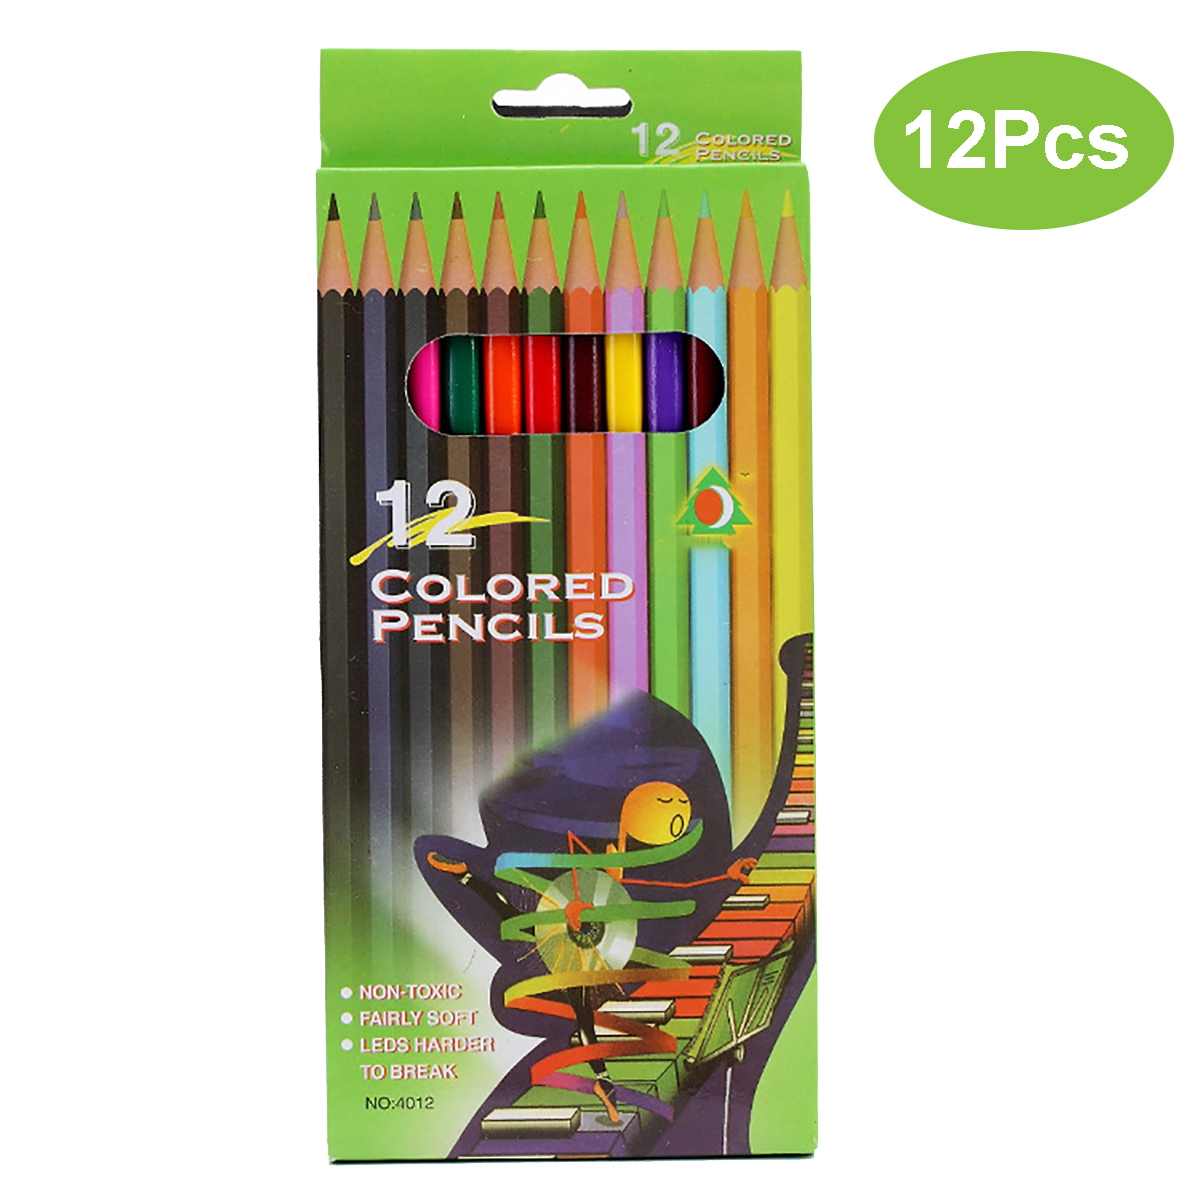 12-Colors-Wood-Color-Pencils-Set-Non-toxic-Artist-Painting-Oil-Pencil-for-School-Office-Drawing-Sket-1742753-8